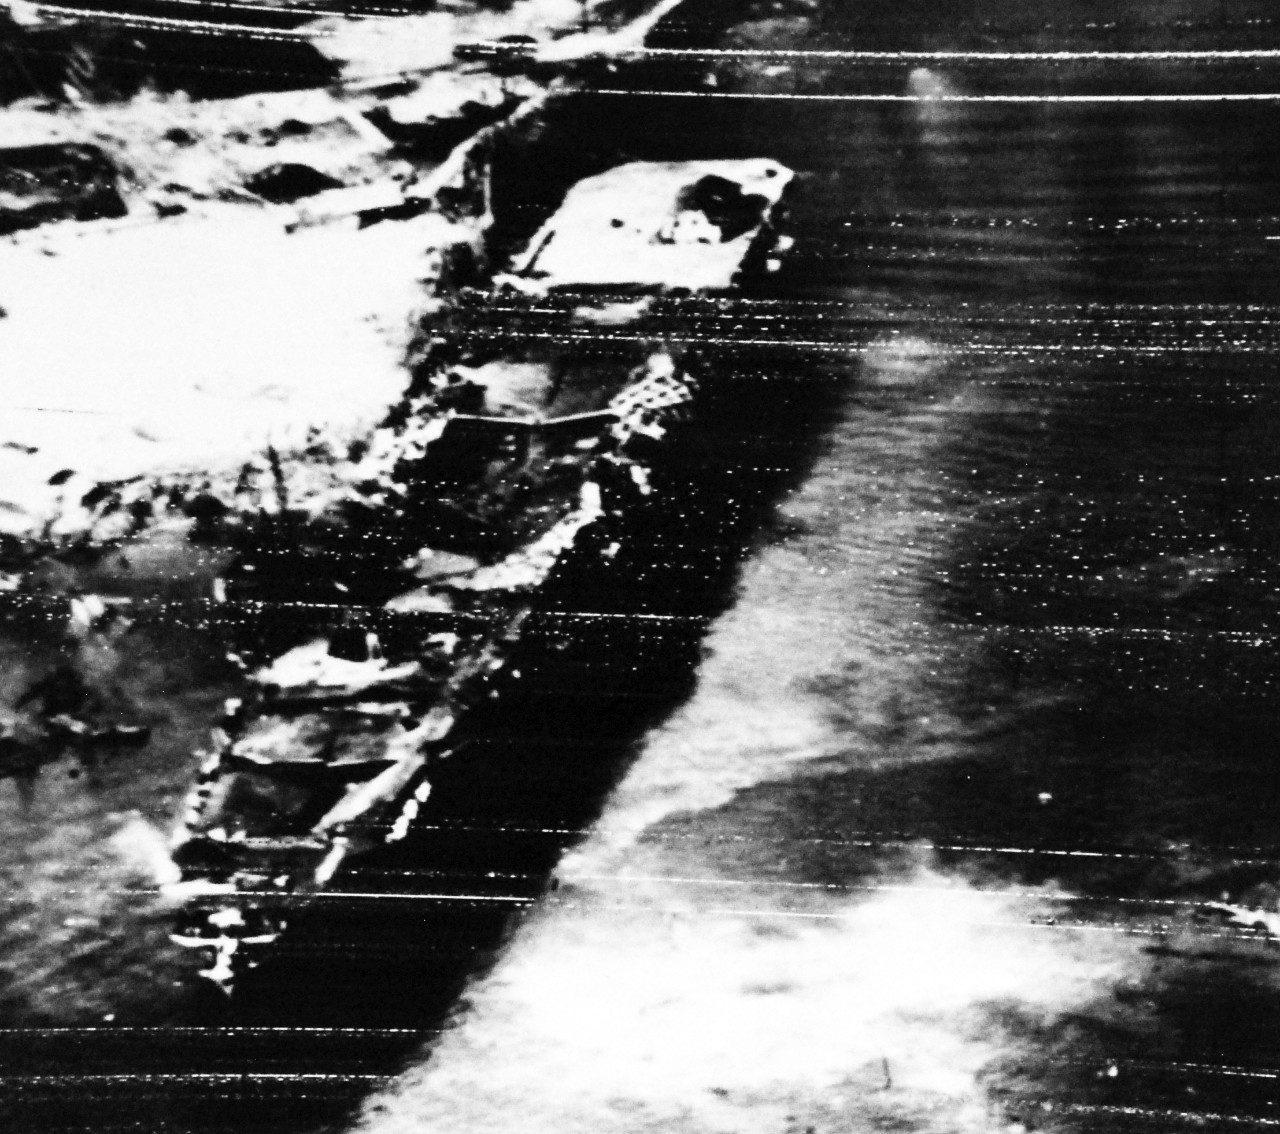 80-G-490169:   Raids on Japanese Home Islands, July 30, 1945.   Japanese carriers of the Amagi-Katsuragi class hit by bombers at Kure Bay, Japan.  Radio photograph, July 30, 1945.    U.S. Navy Photograph, now in the collections of the National Archives. (2015/12/08). 